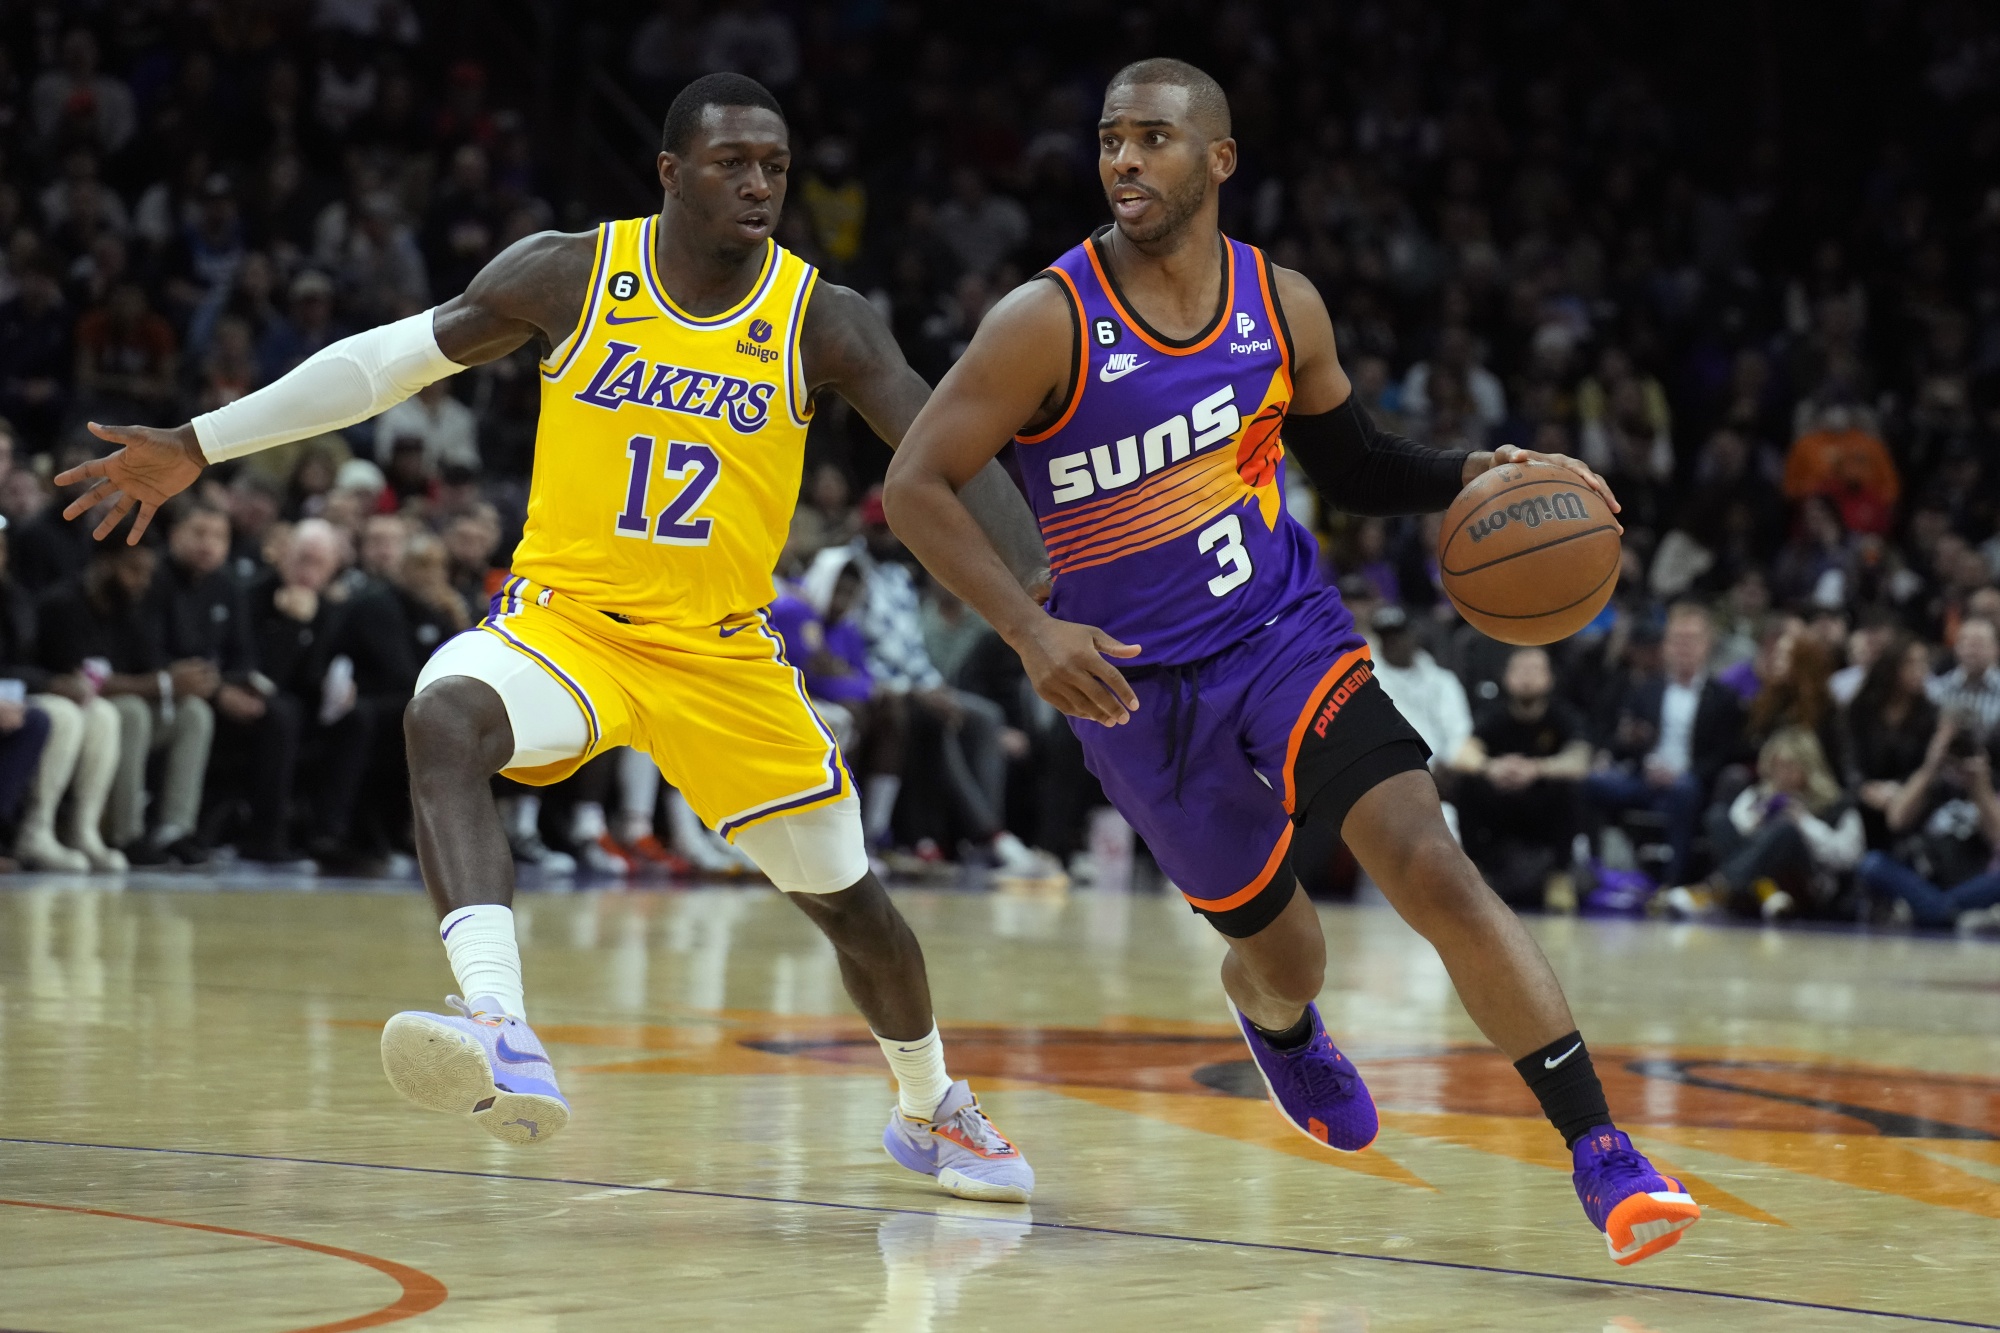 Chris Paul of the Phoenix Suns dribbles the ball against the